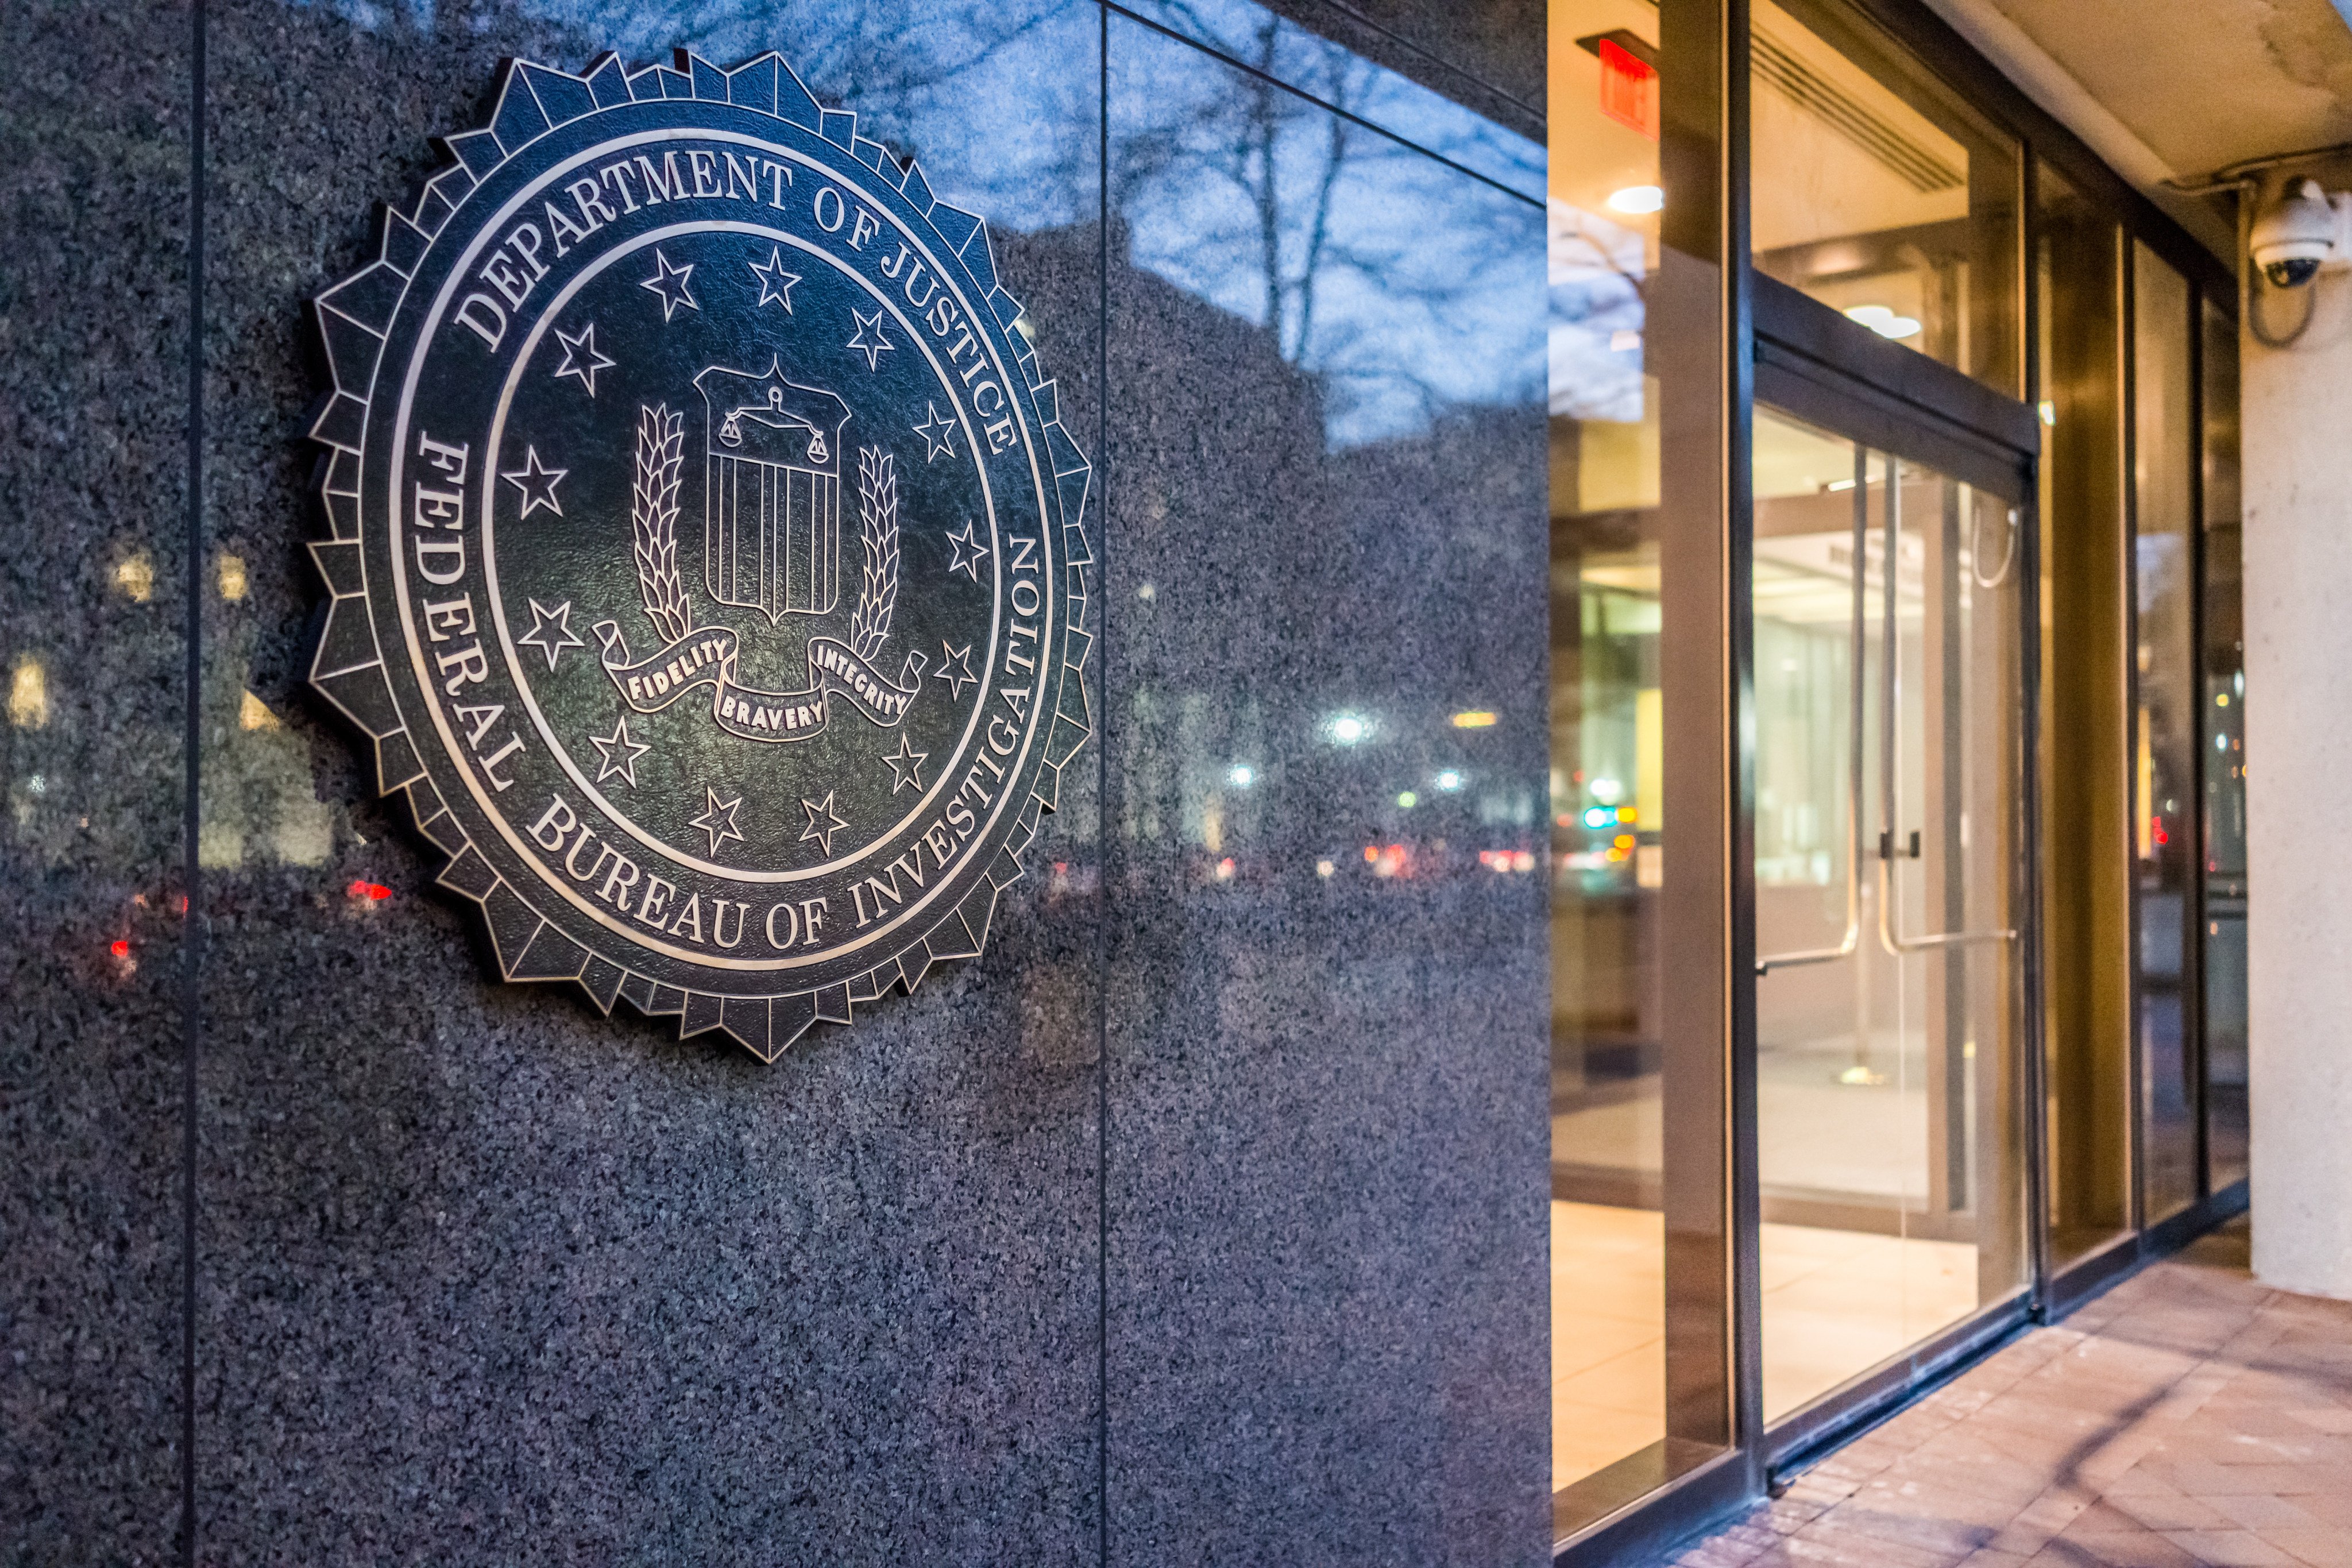 A senior FBI official says the bureau needs to “open lines of communication” with the Asian-American community. Photo: Shutterstock